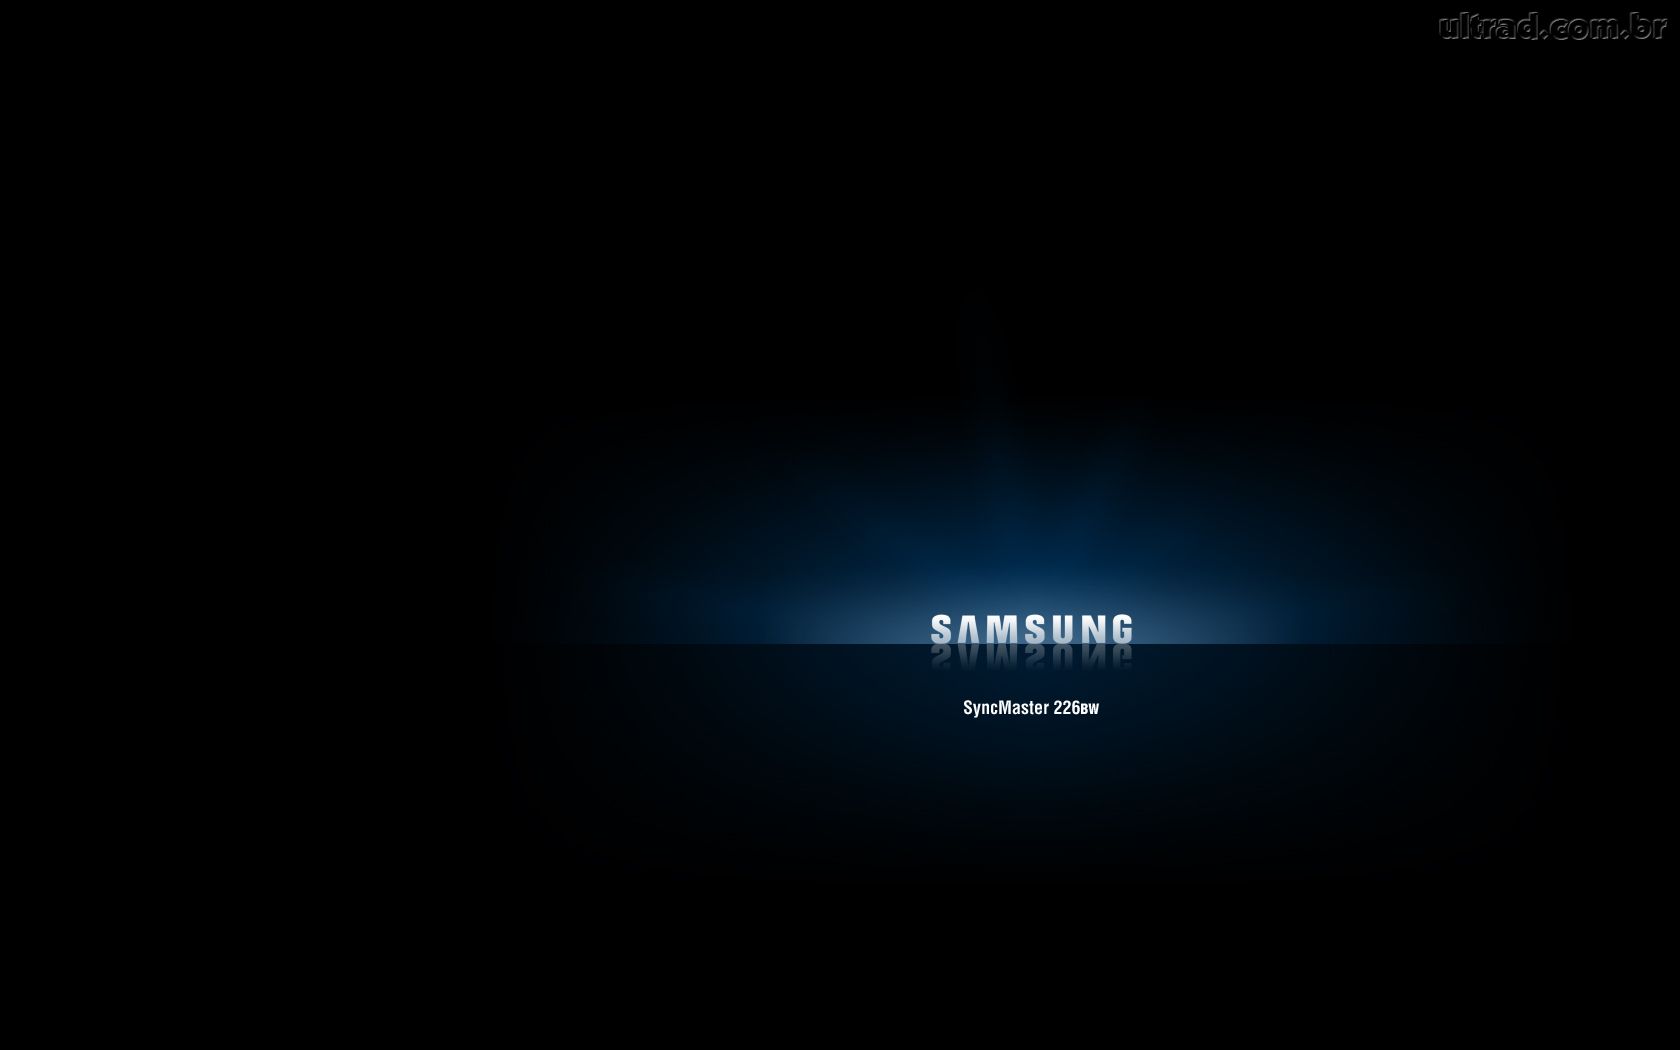 Samsung HD DeskScreen Photos Wallpapers and Pictures download